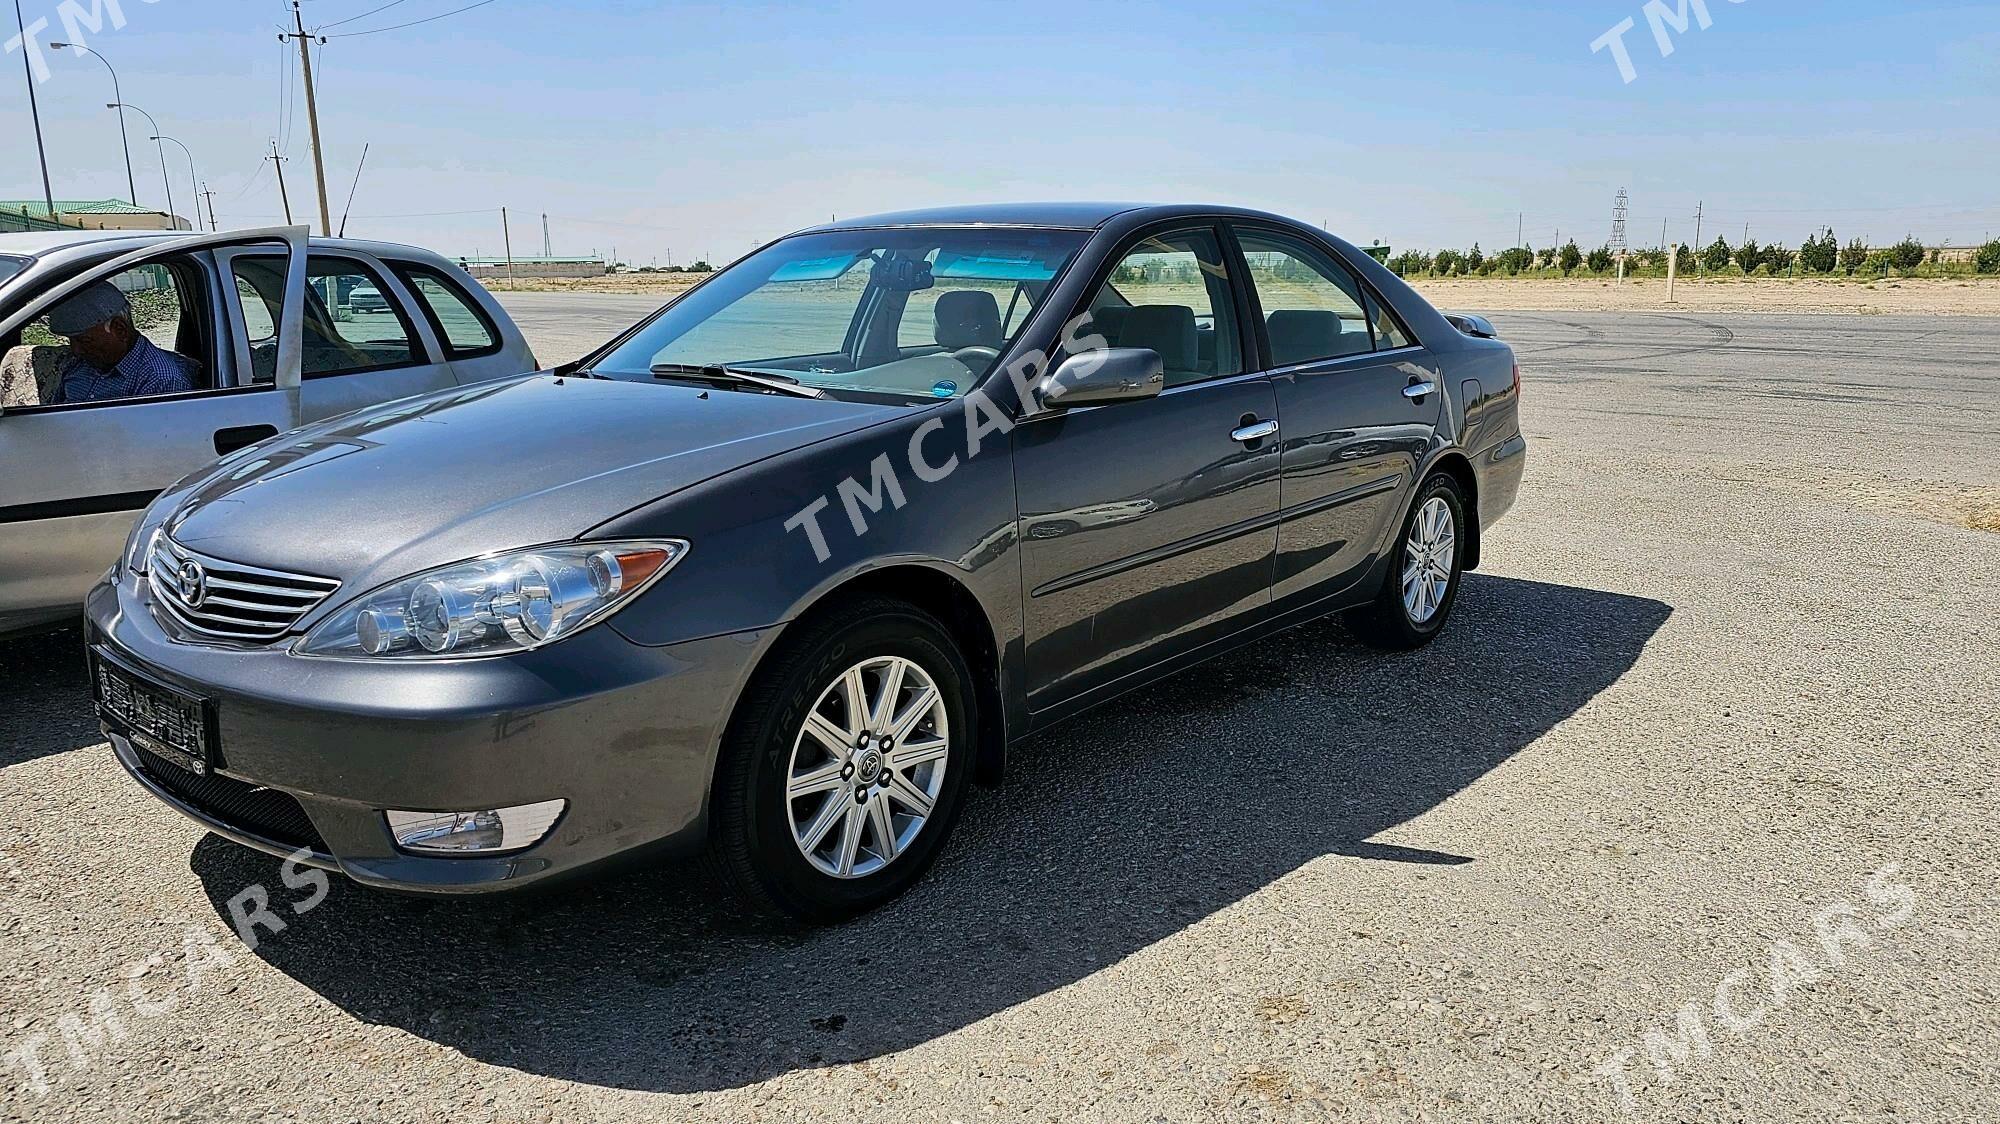 Toyota Camry 2003 - 120 000 TMT - Mary - img 3